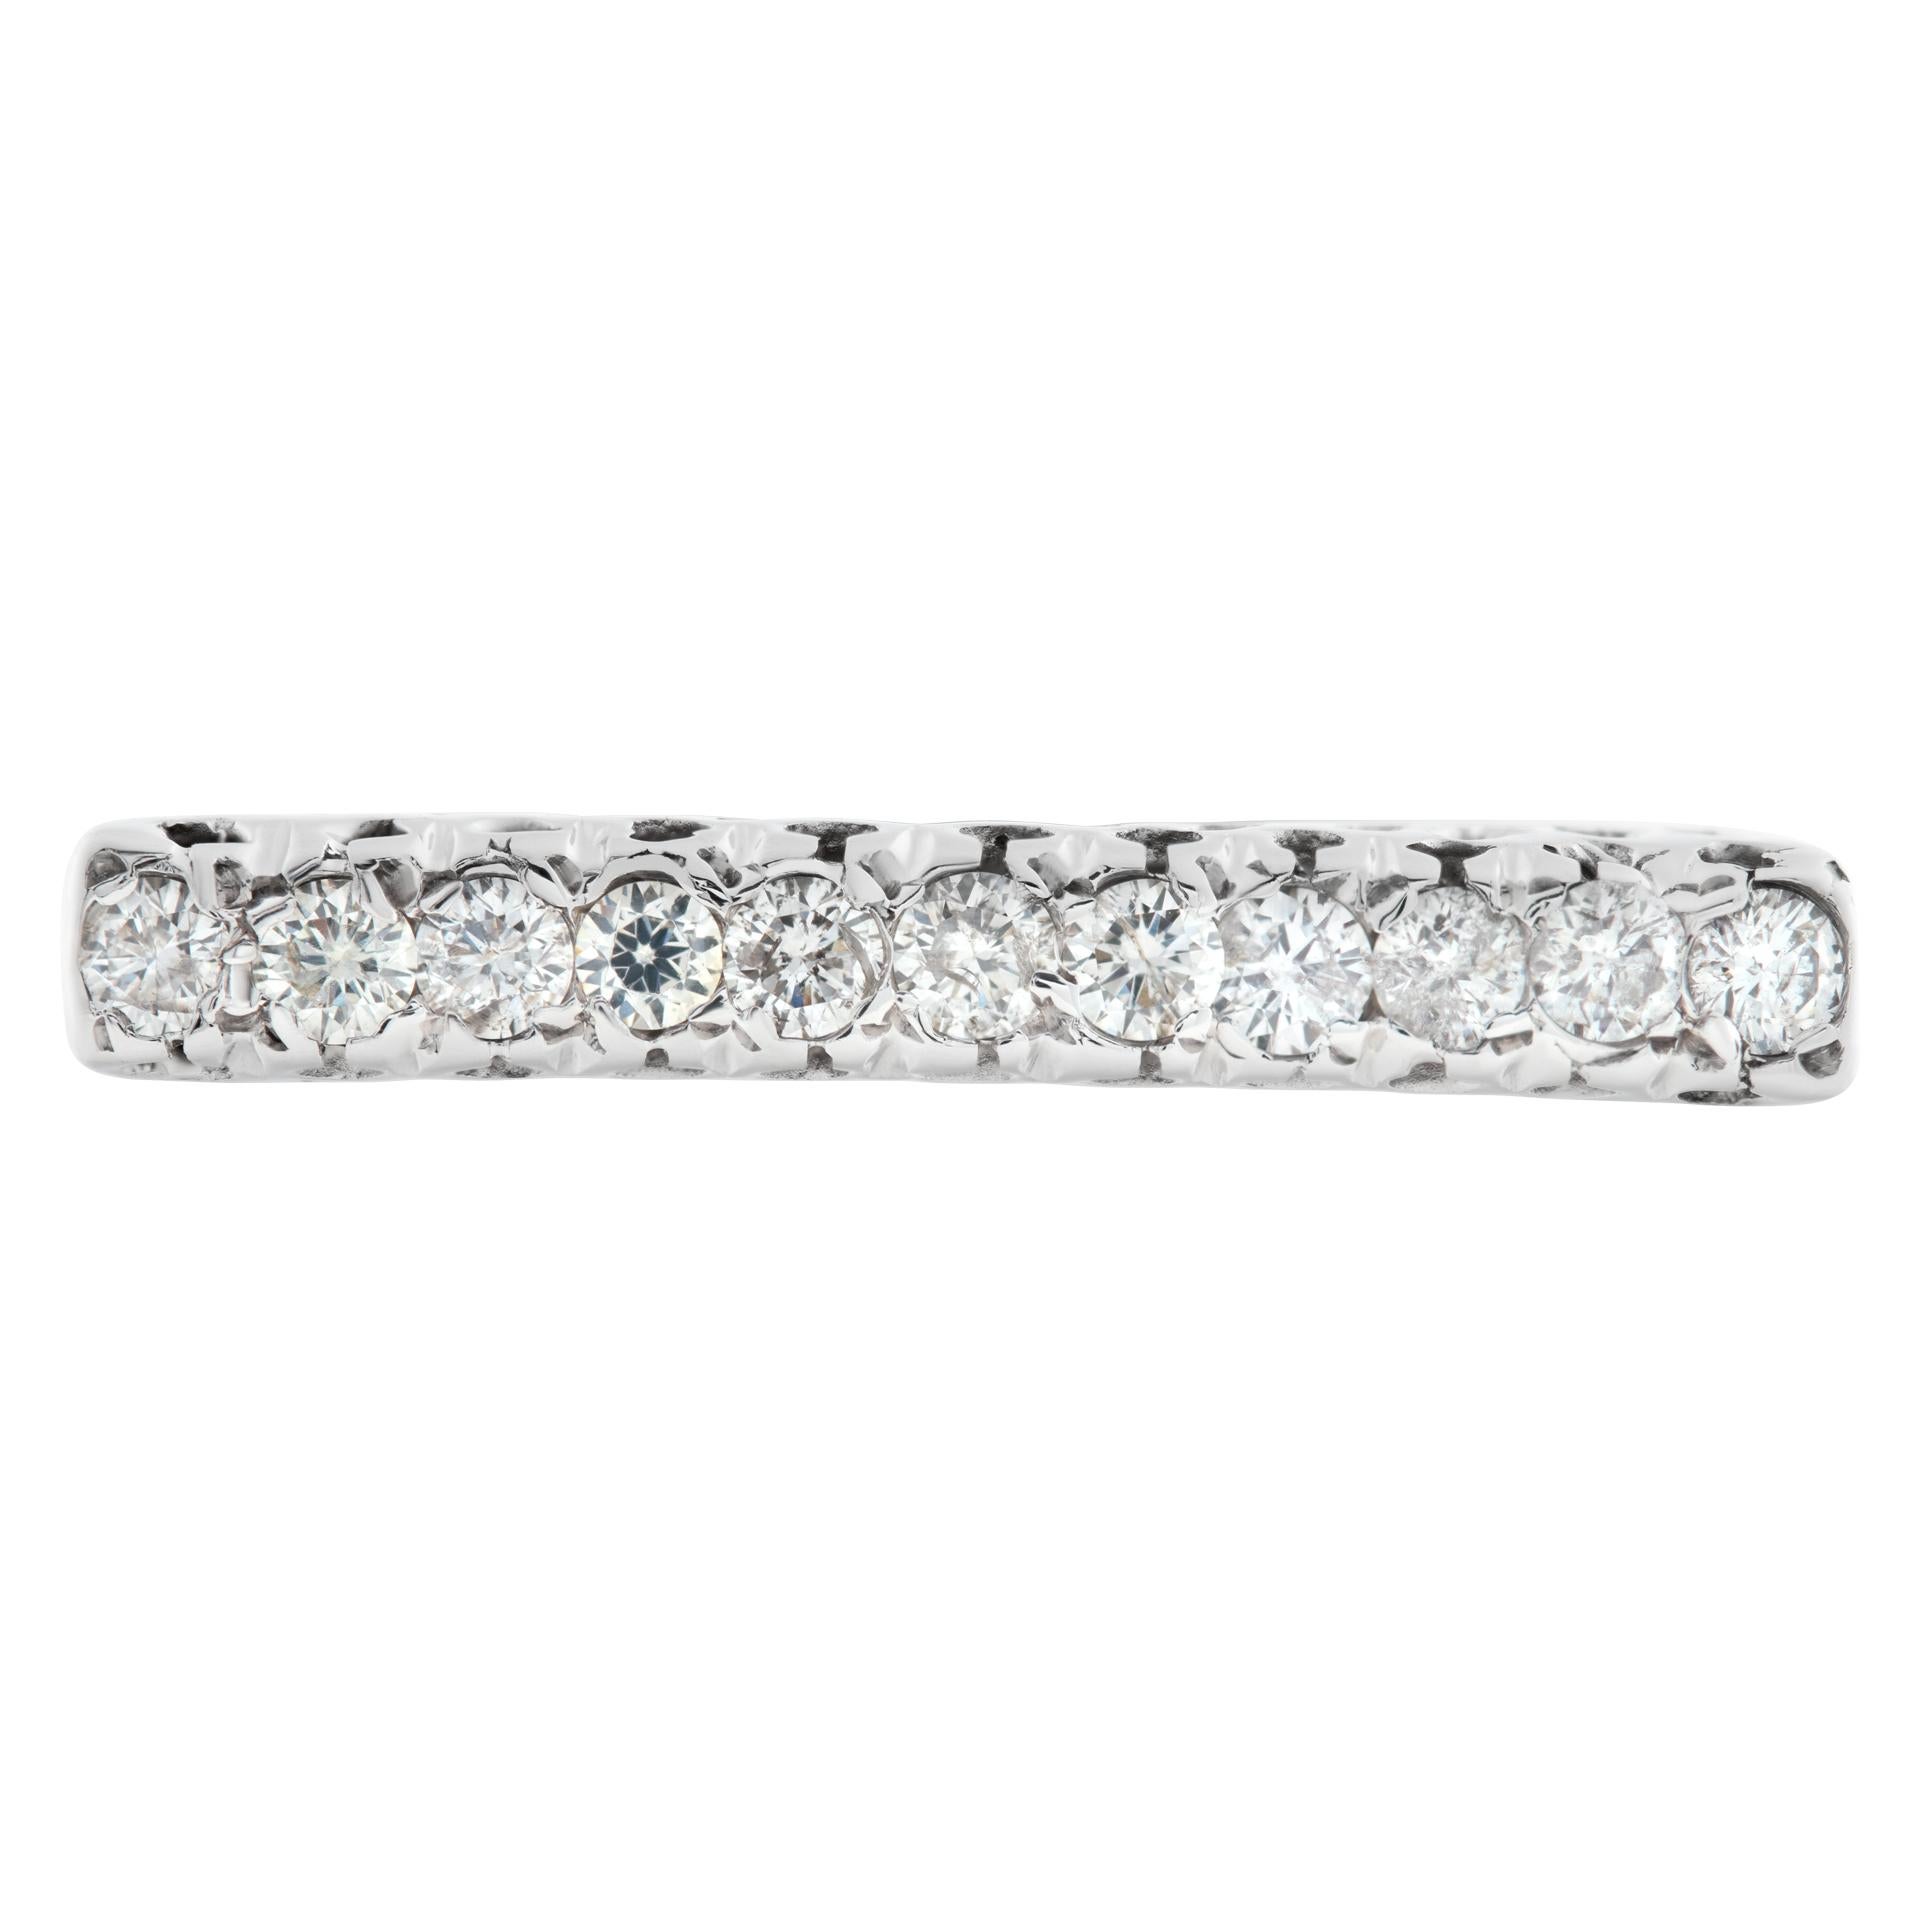 Diamond ring in 18k white gold with a single row of round diamonds with approximately 0.33 carat, I-J color, Si1 clarity. Size 8.This Diamond ring is currently size 8 and some items can be sized up or down, please ask! It weighs 3.2 pennyweights and